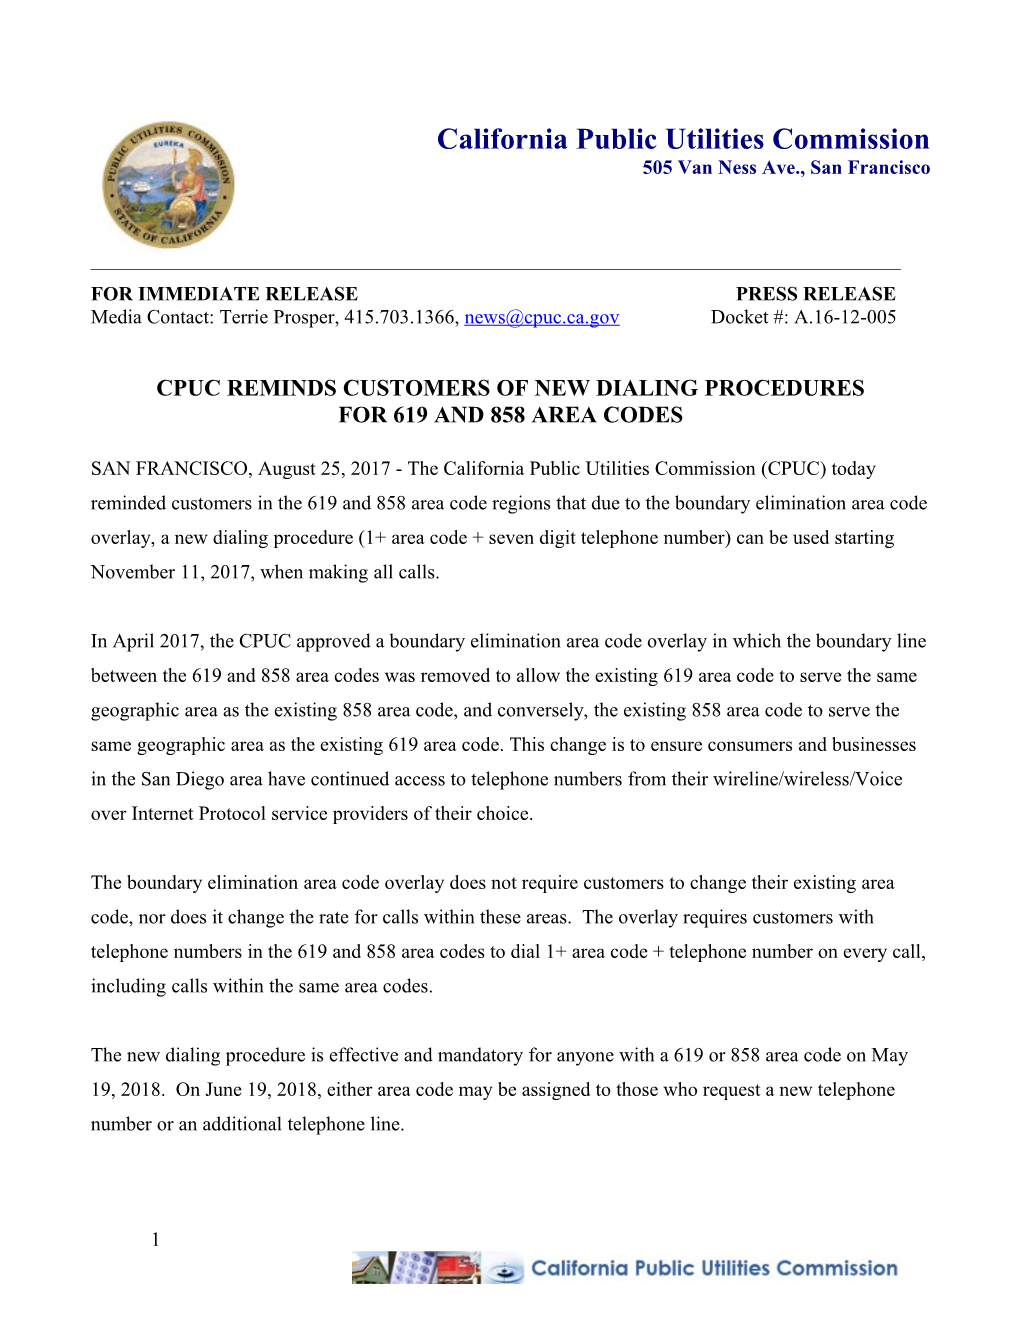 Cpuc Reminds Customers of New Dialing Procedures for 619 and 858 Area Codes